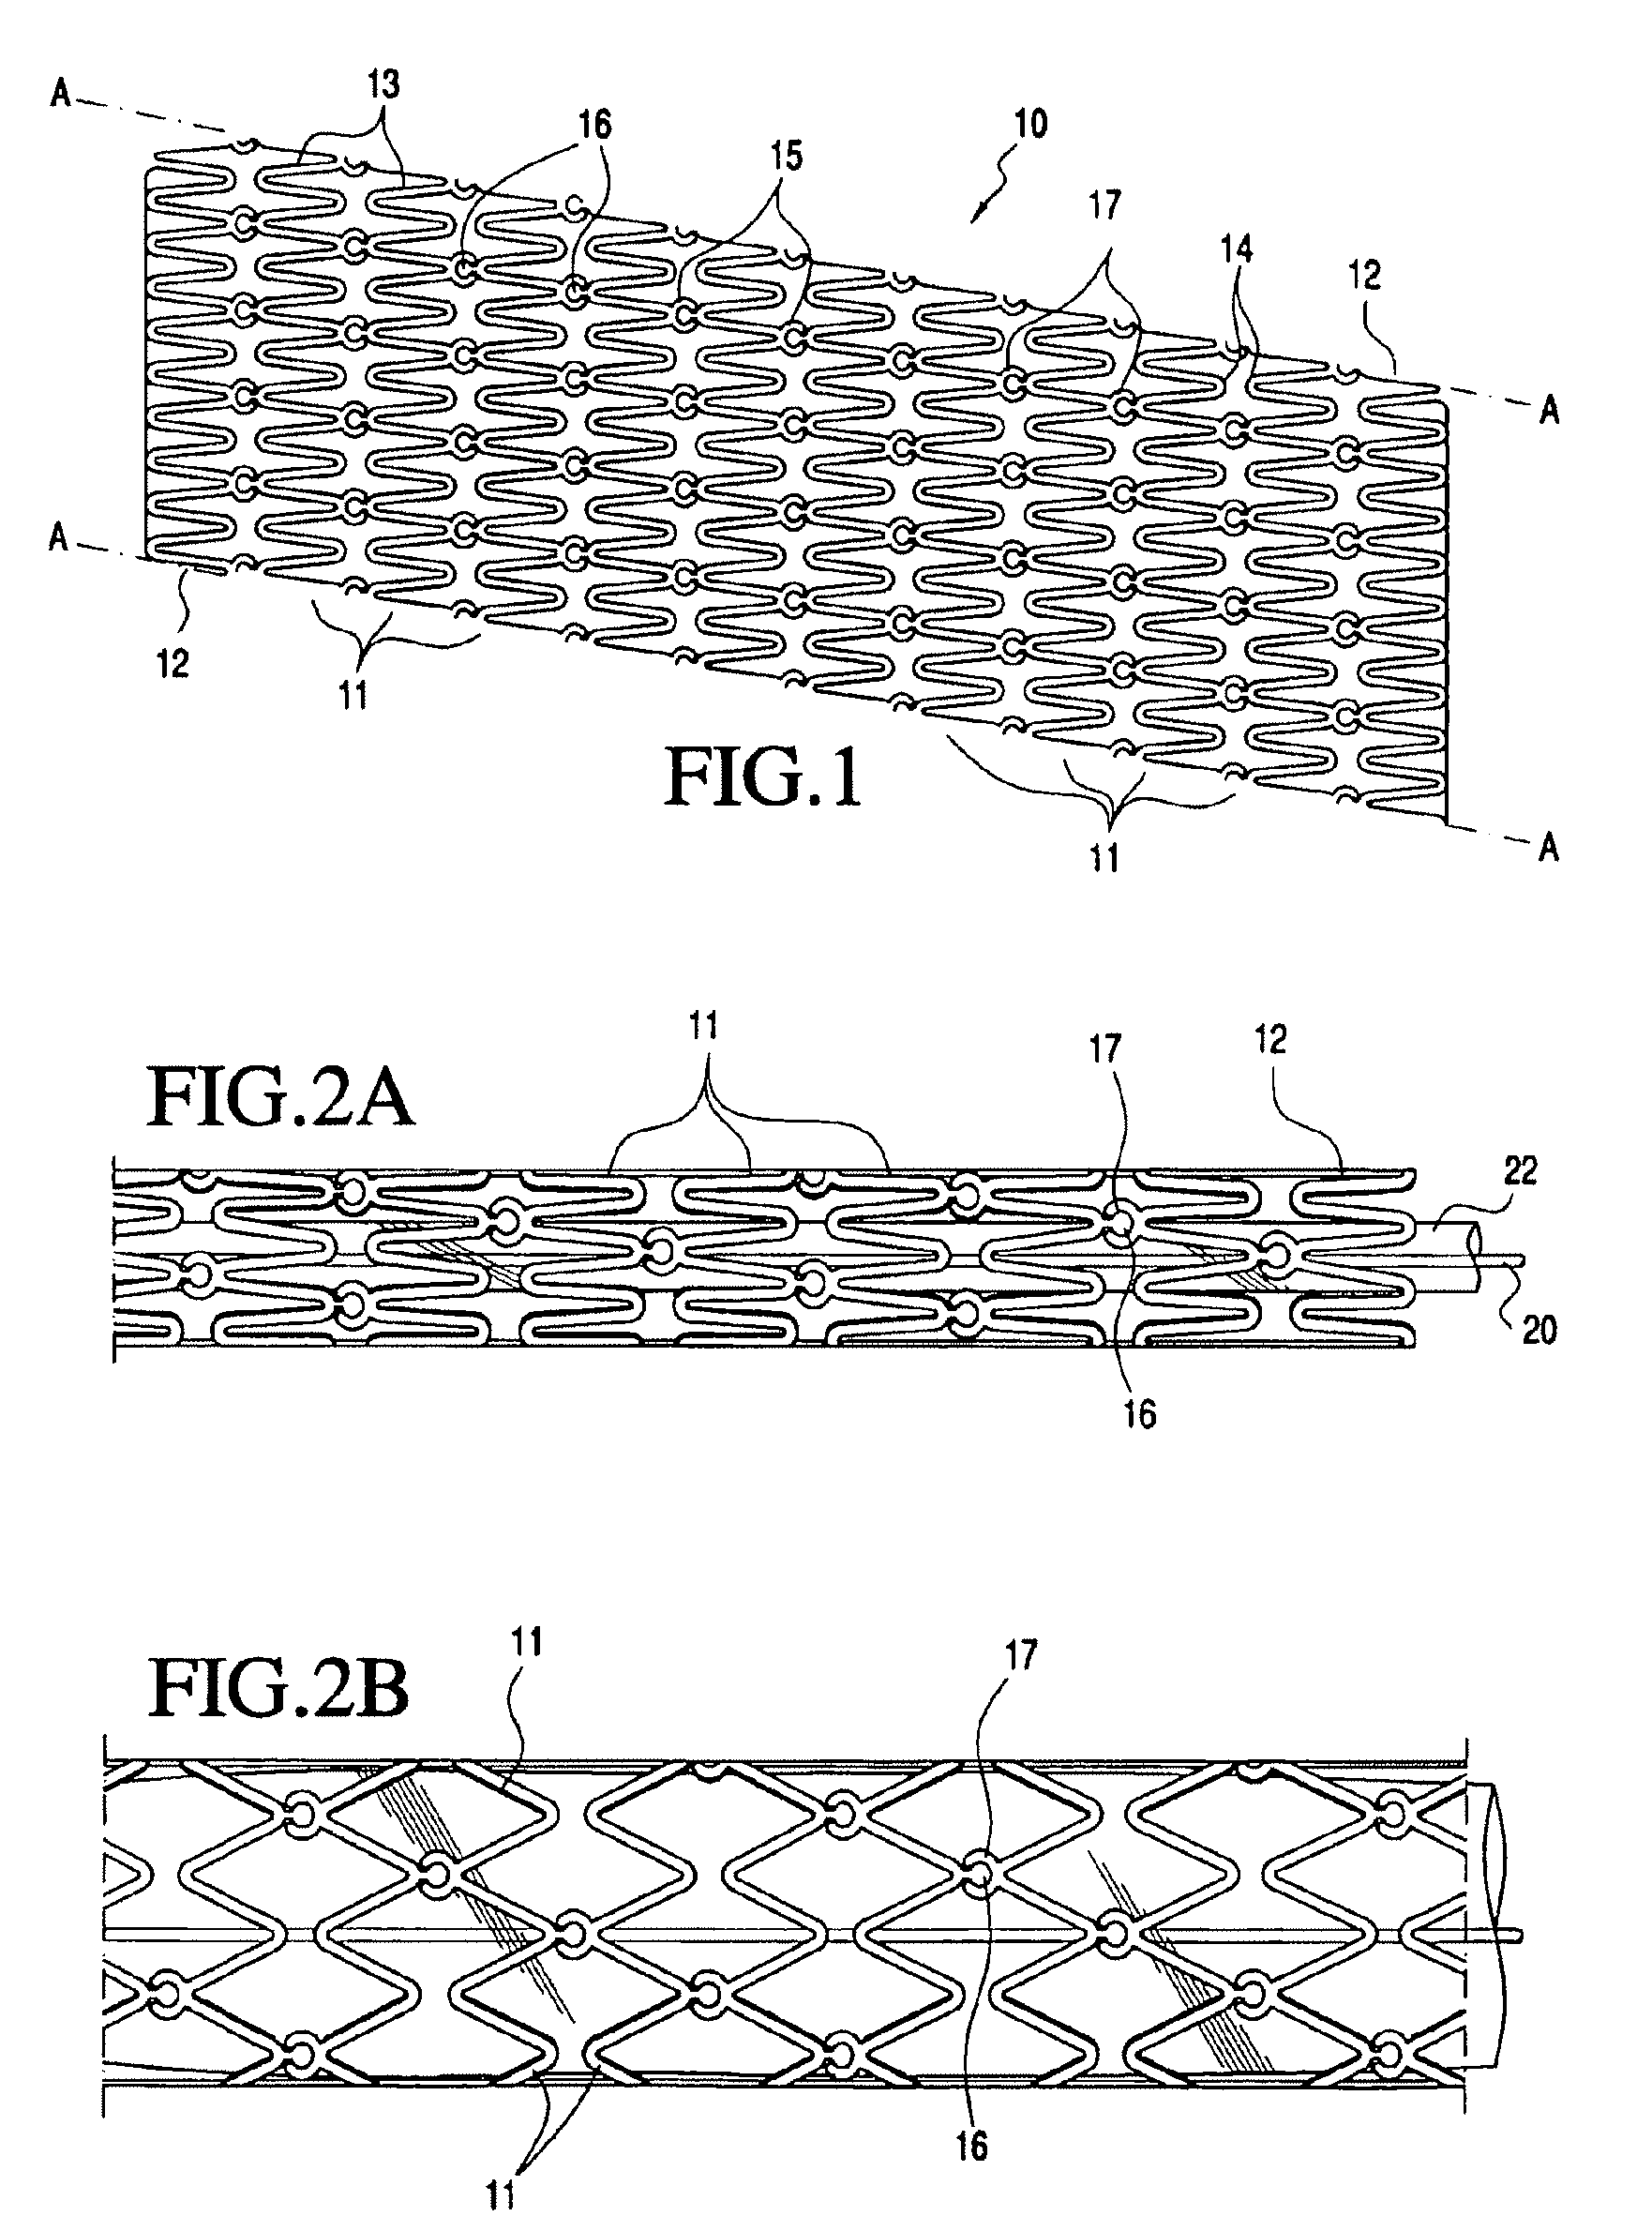 Modular vascular prosthesis and methods of use